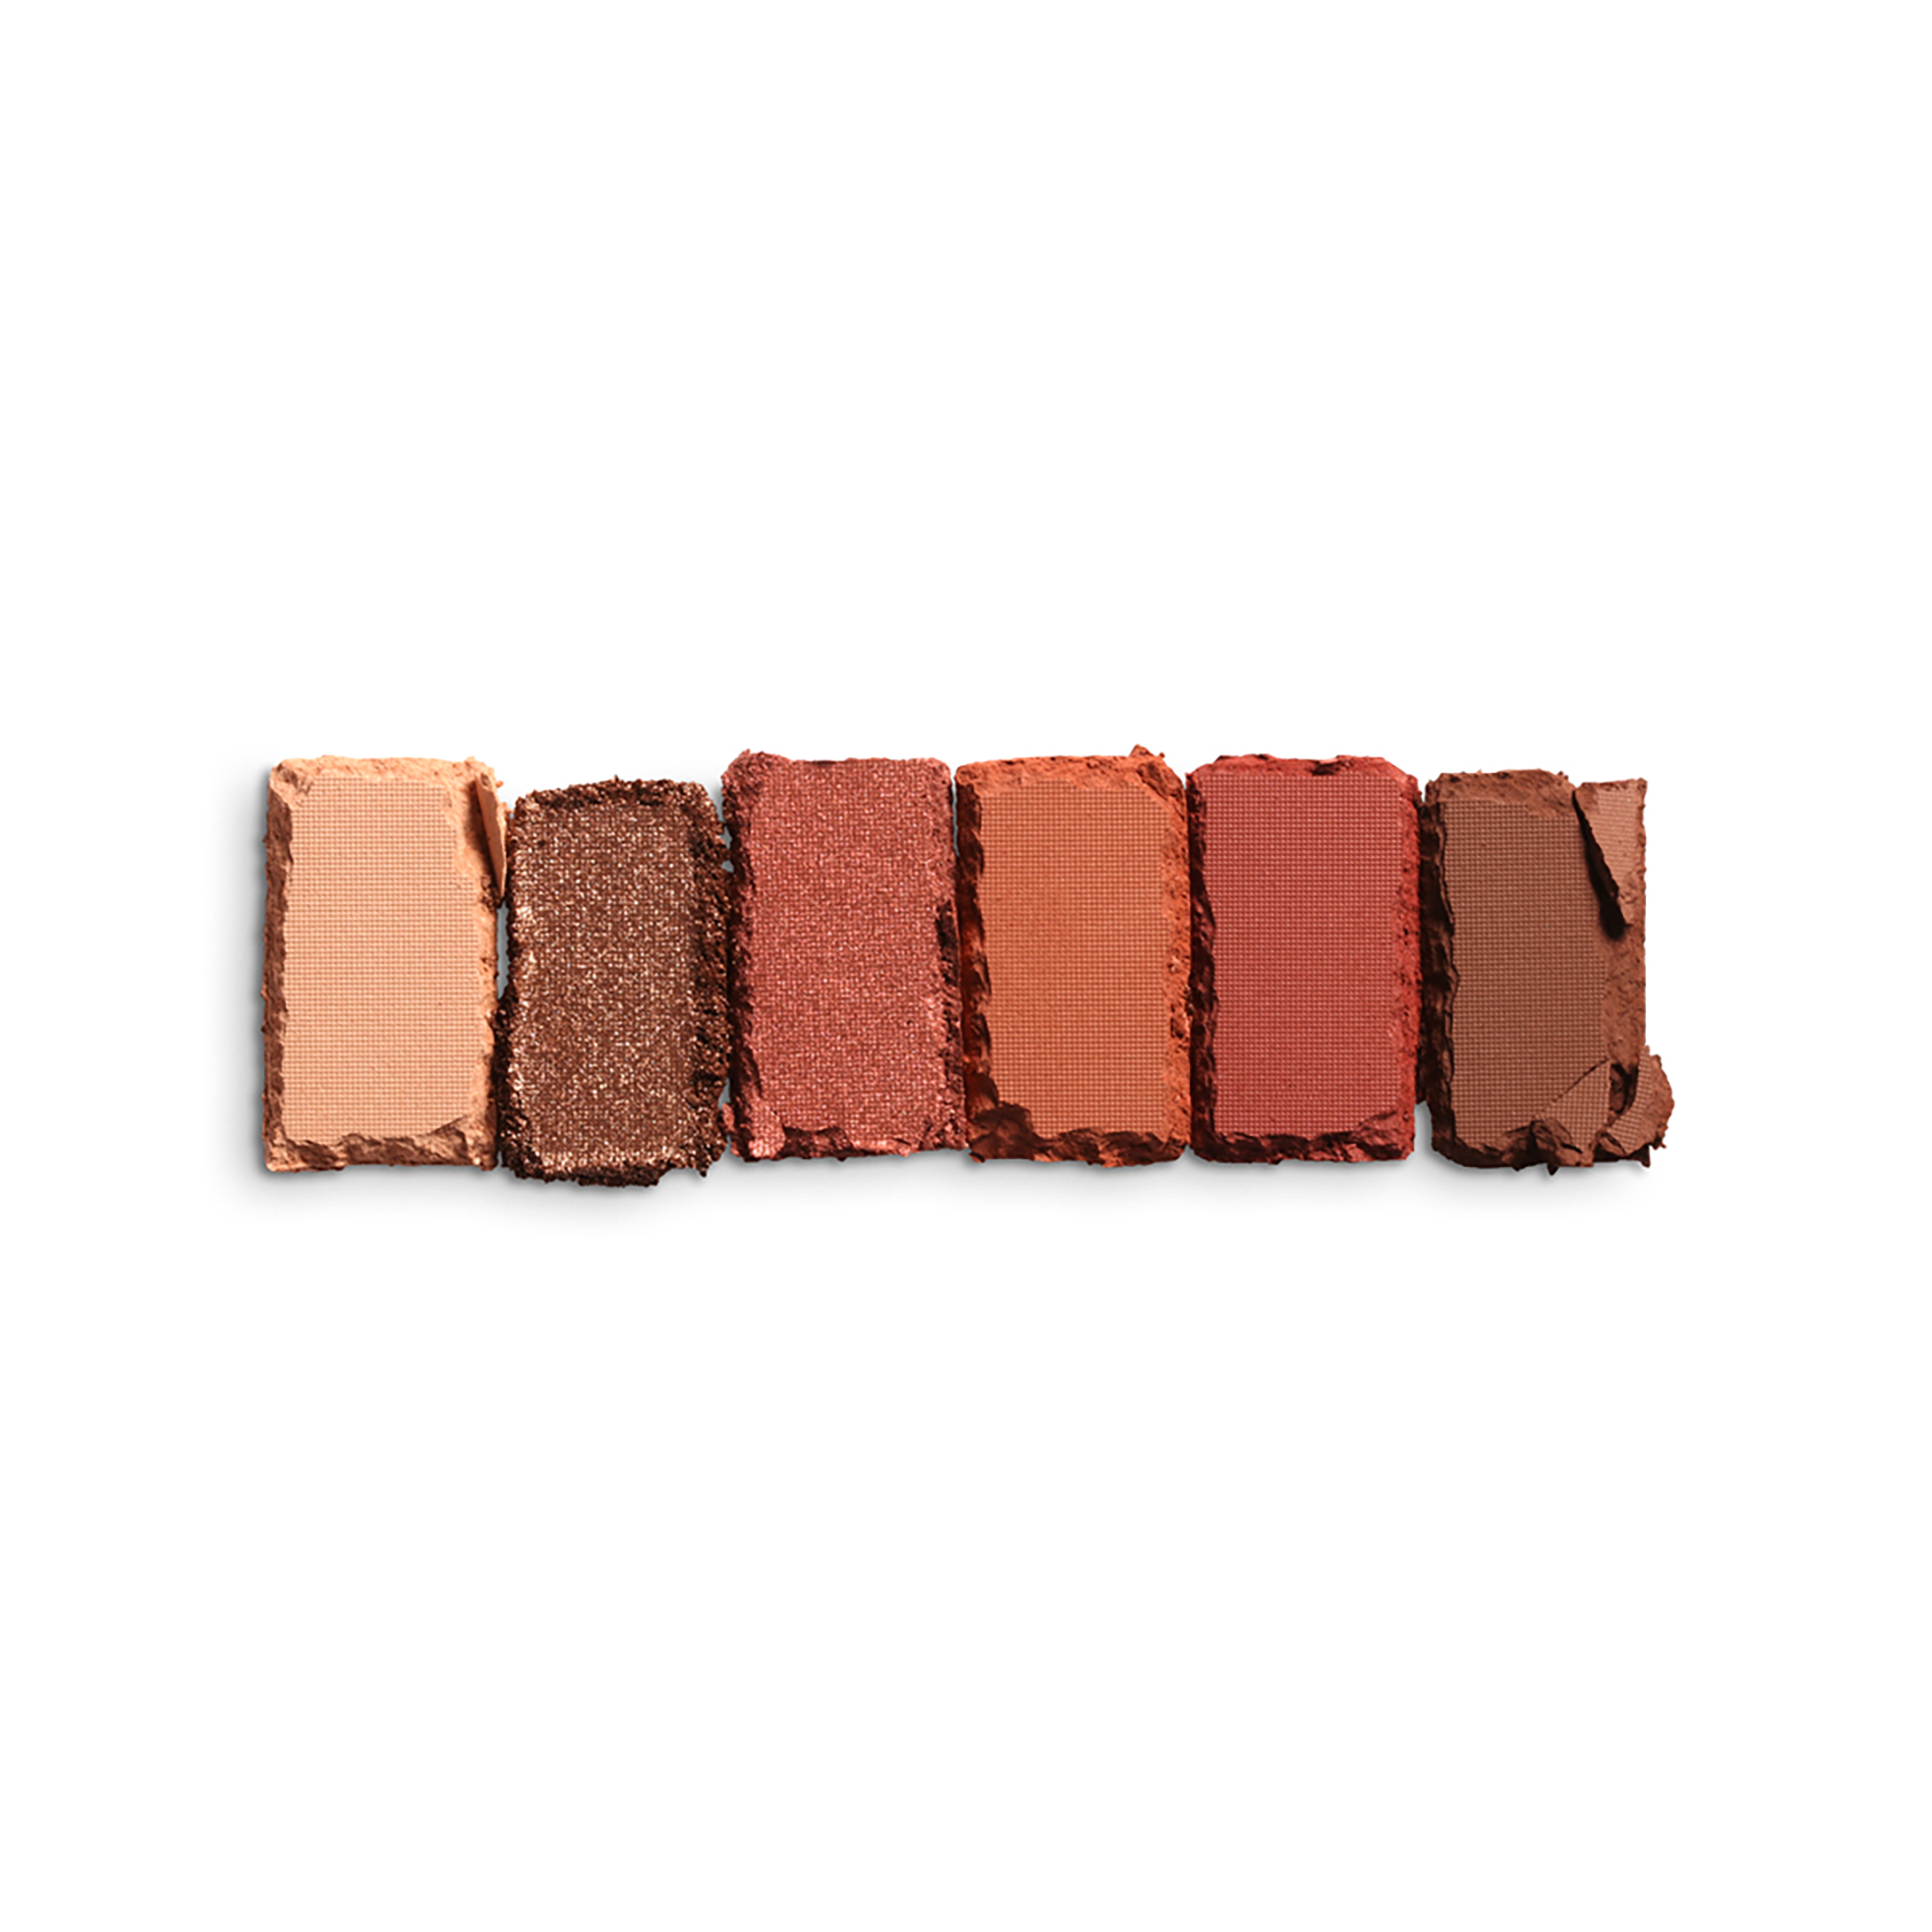 NYX Professional Makeup Ultimate Edit Petite Shadow Palette, Warm Neutrals - image 3 of 7